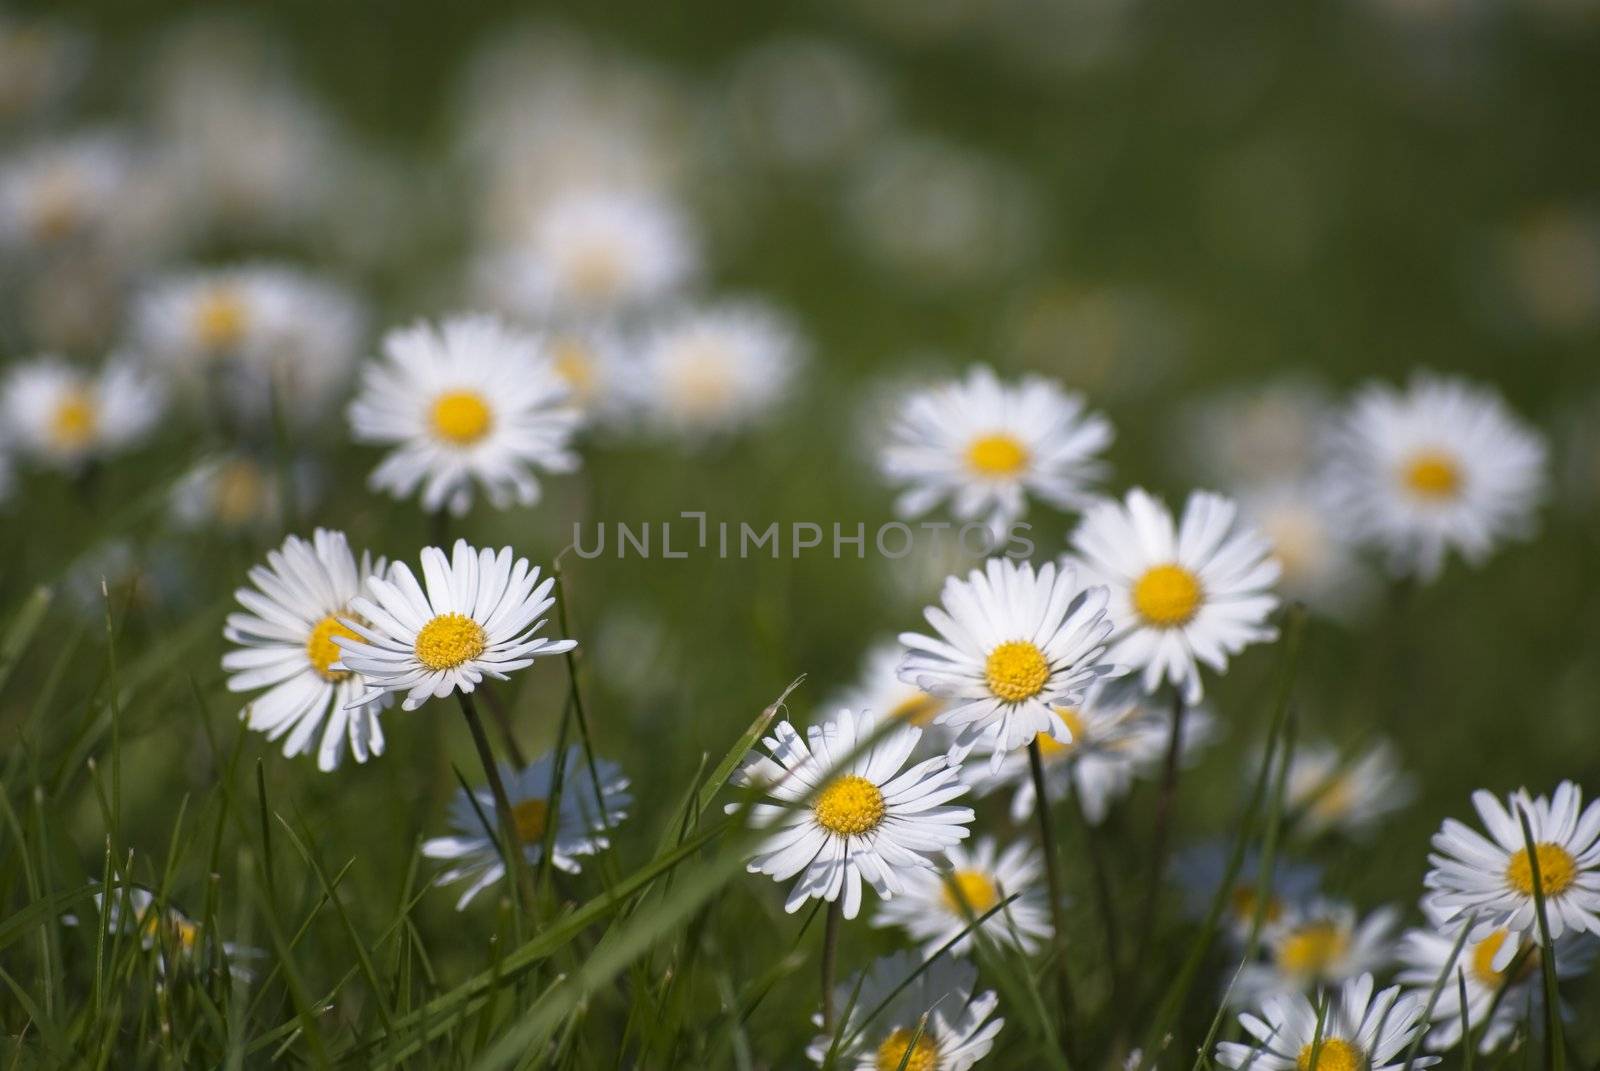 Daisies in Meadow by frannyanne